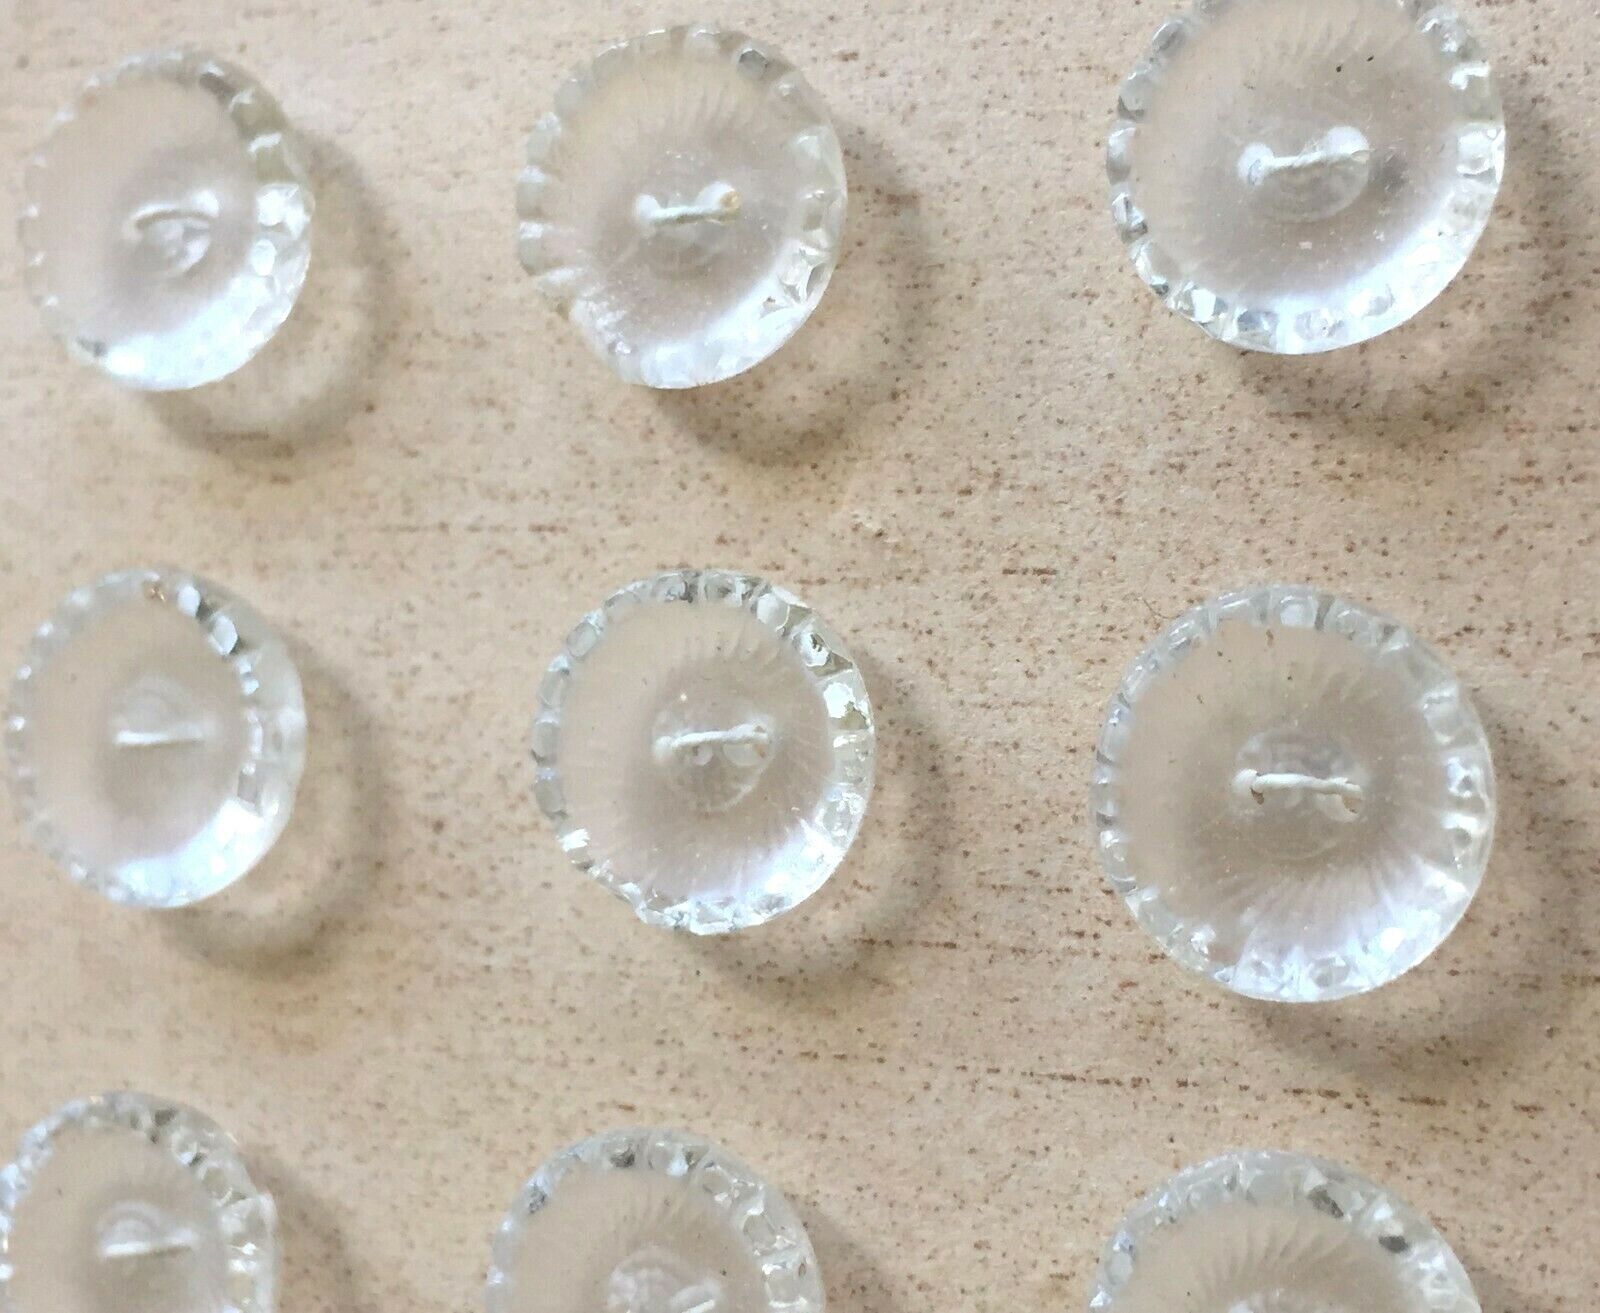 Vintage Glass Buttons - 9 Small Clear Glass Beveled 2-hole Buttons - Czech Rep.